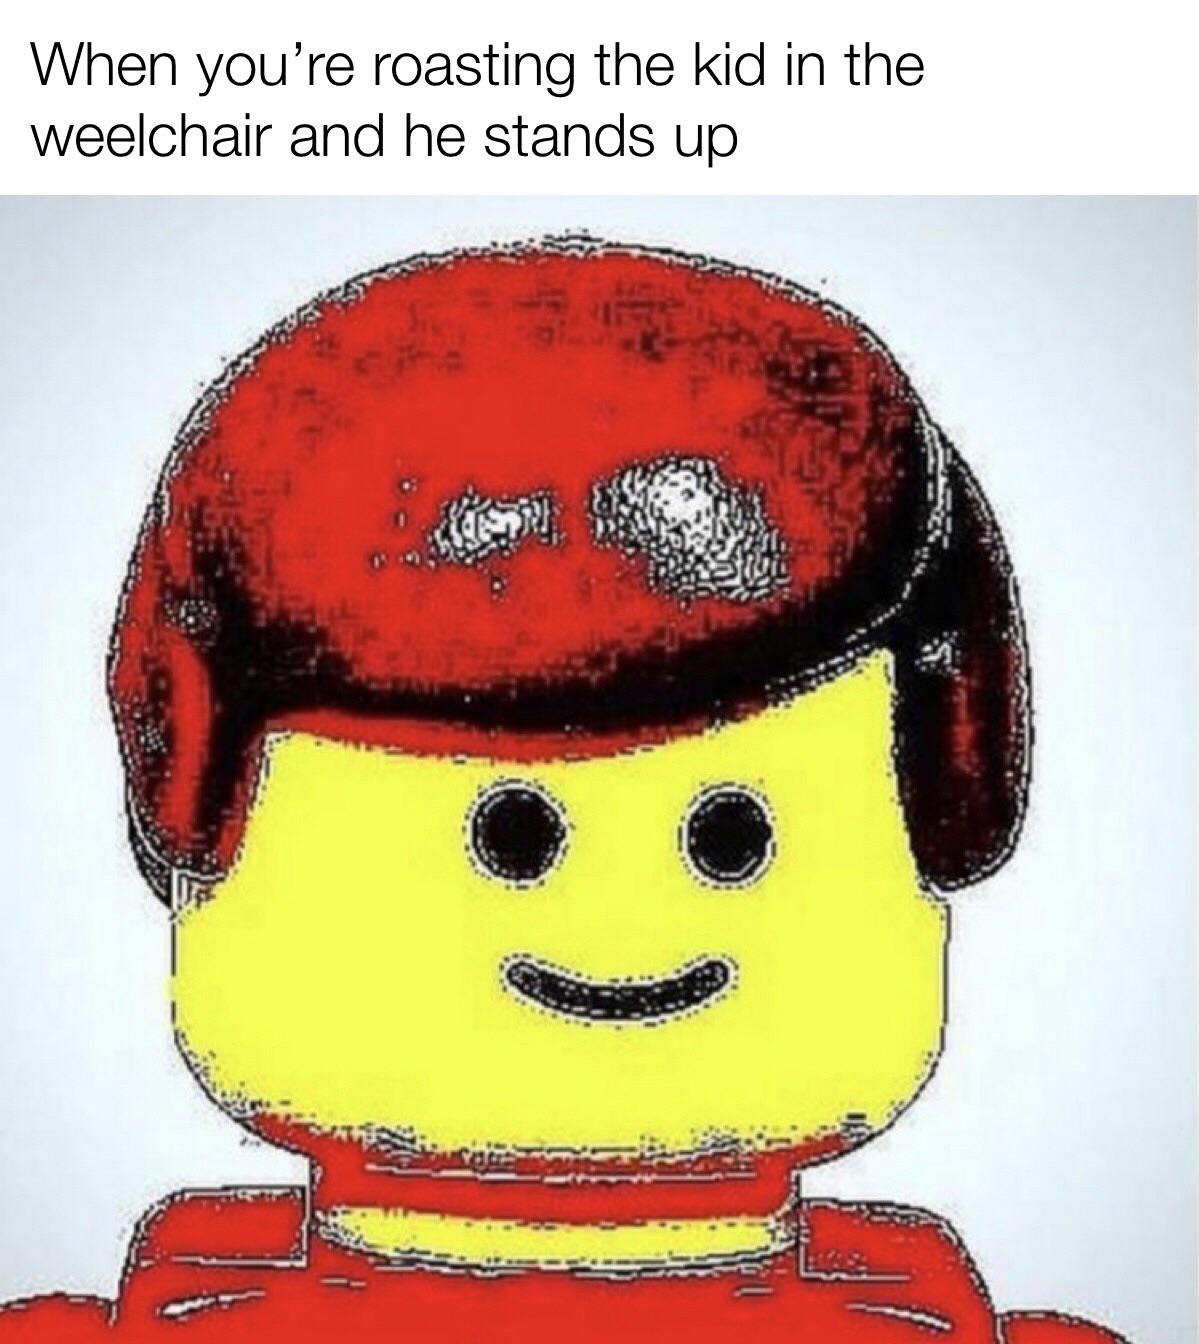 dank memes - When you're roasting the kid in the weelchair and he stands up